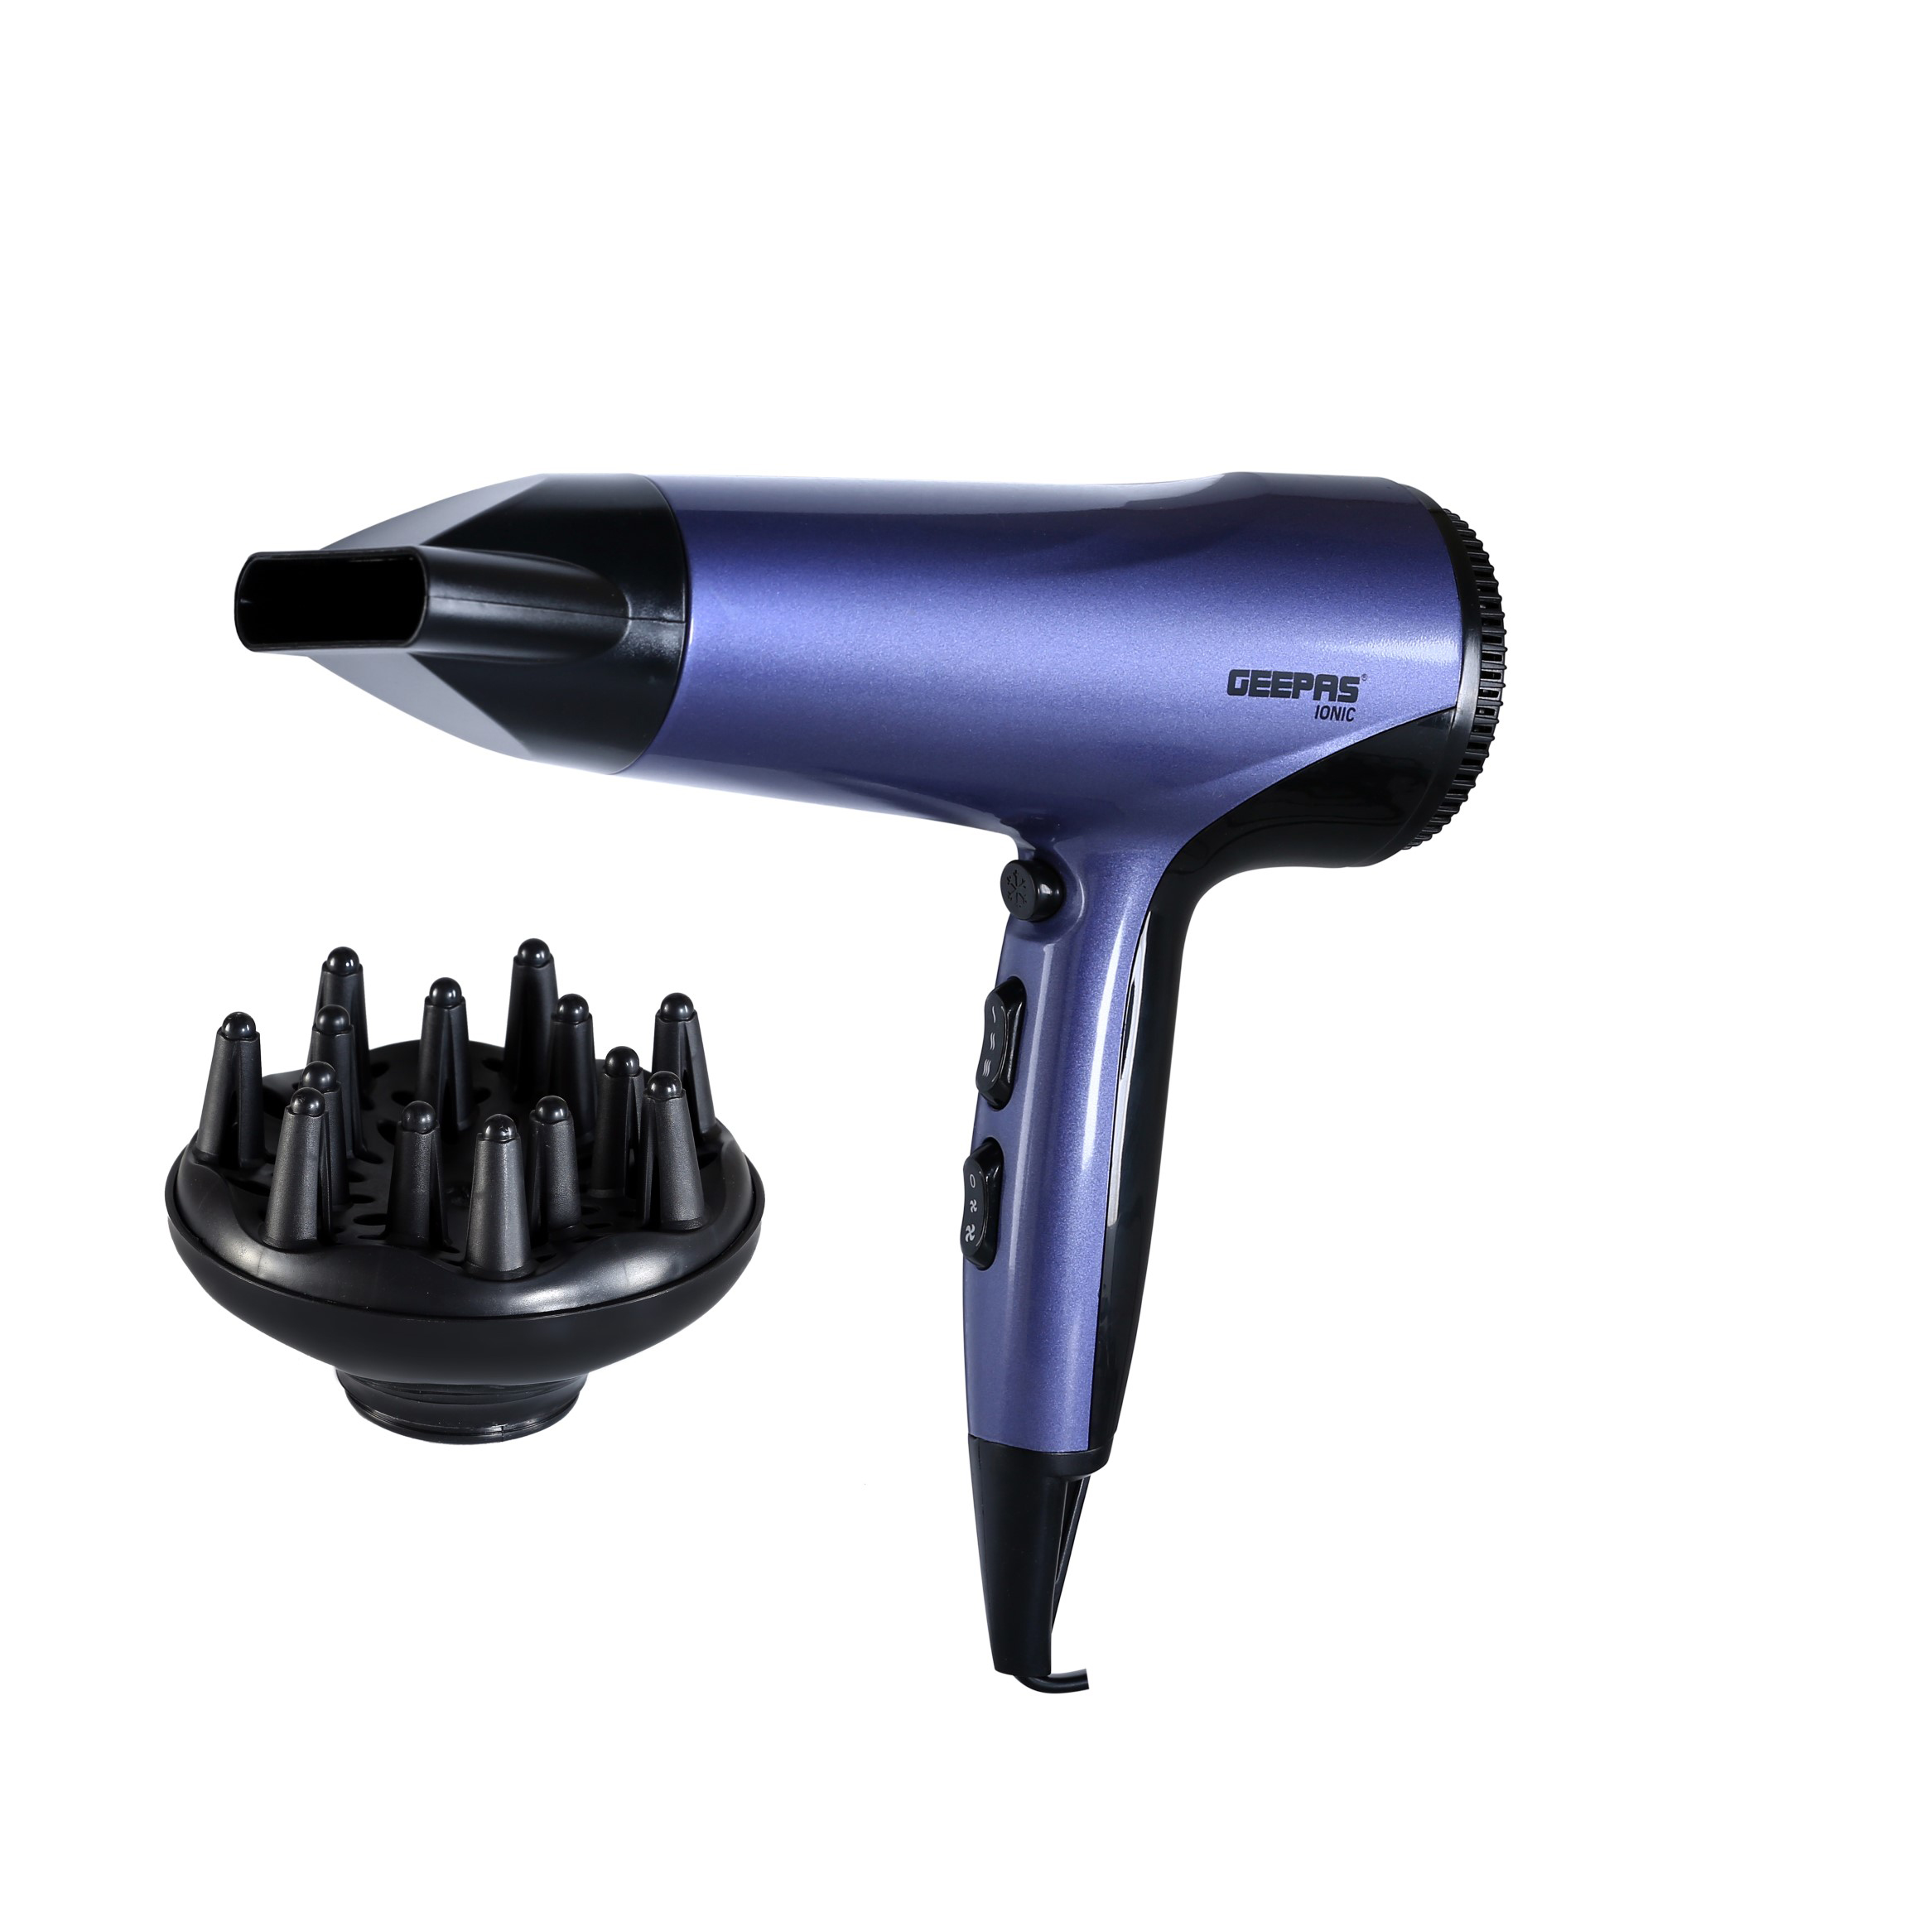 Geepas GHD86017 Compact Hair Dryer 1800W, Portable Ionic Fast Drying Blower with 3 Heat &amp; 2 Speed Settings, Cool Shot, Removable Filter, Quickly Dry &amp; Style Hair